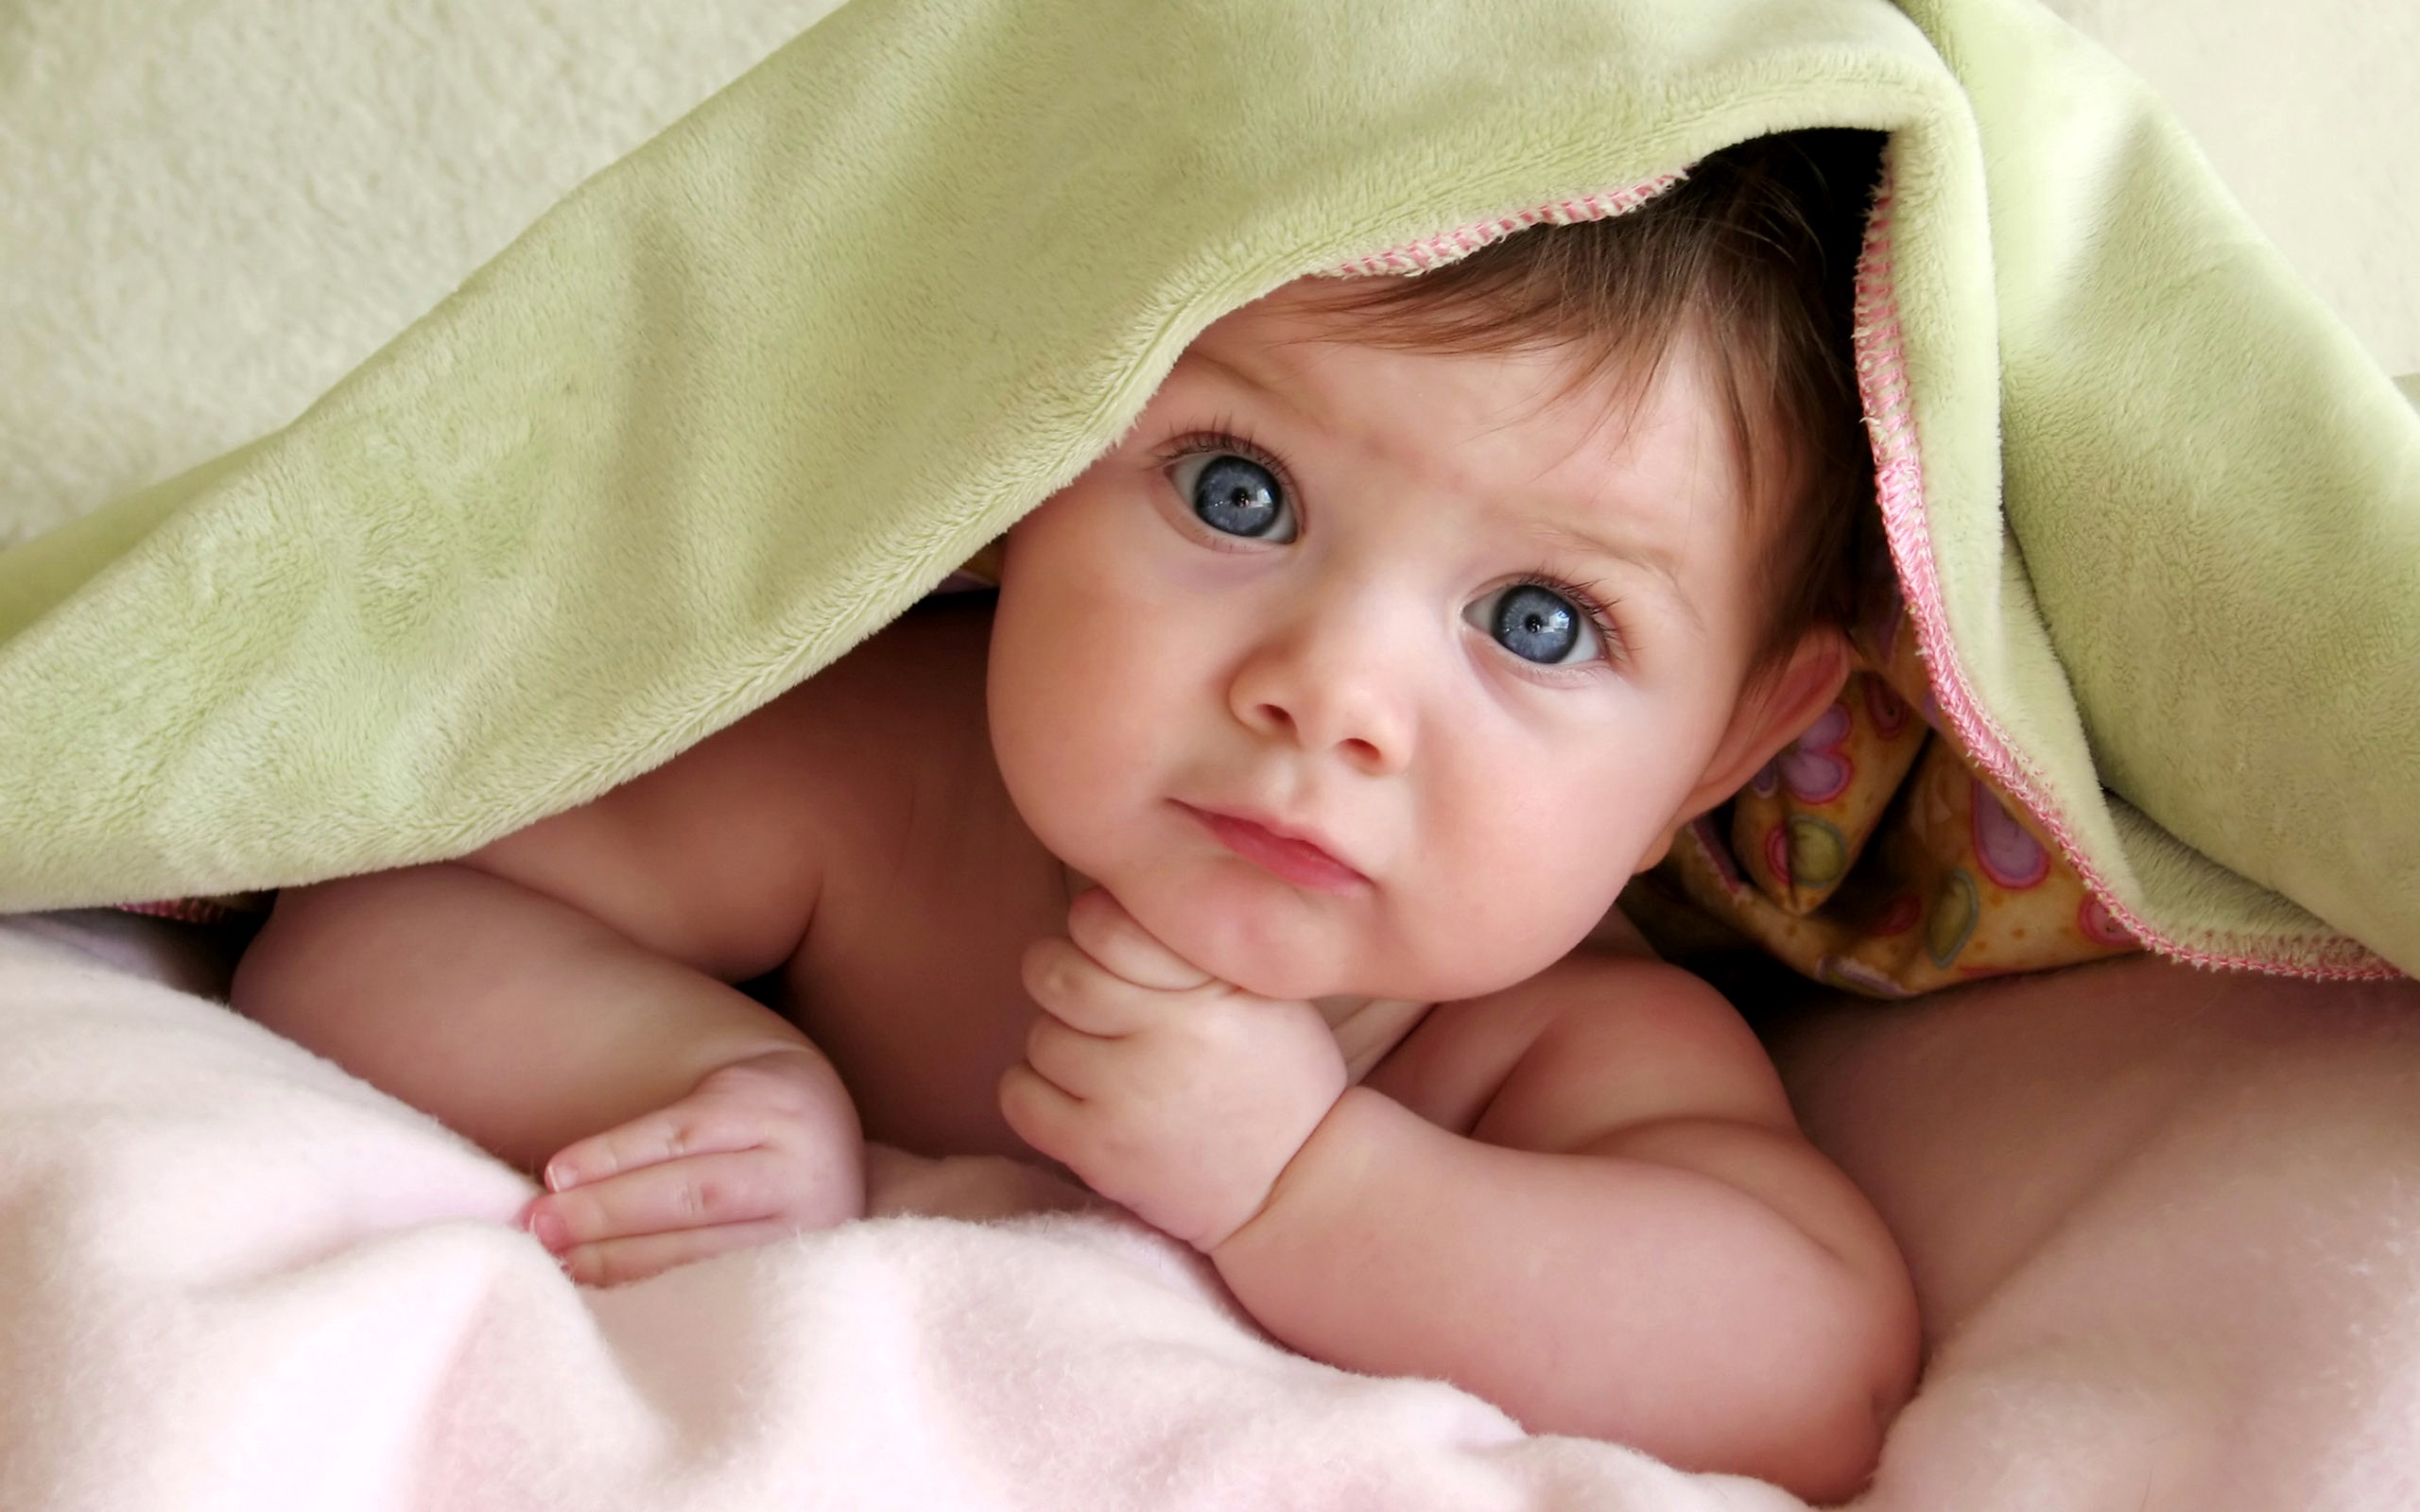 Wallpaper Of Baby A Curious Staring At Something